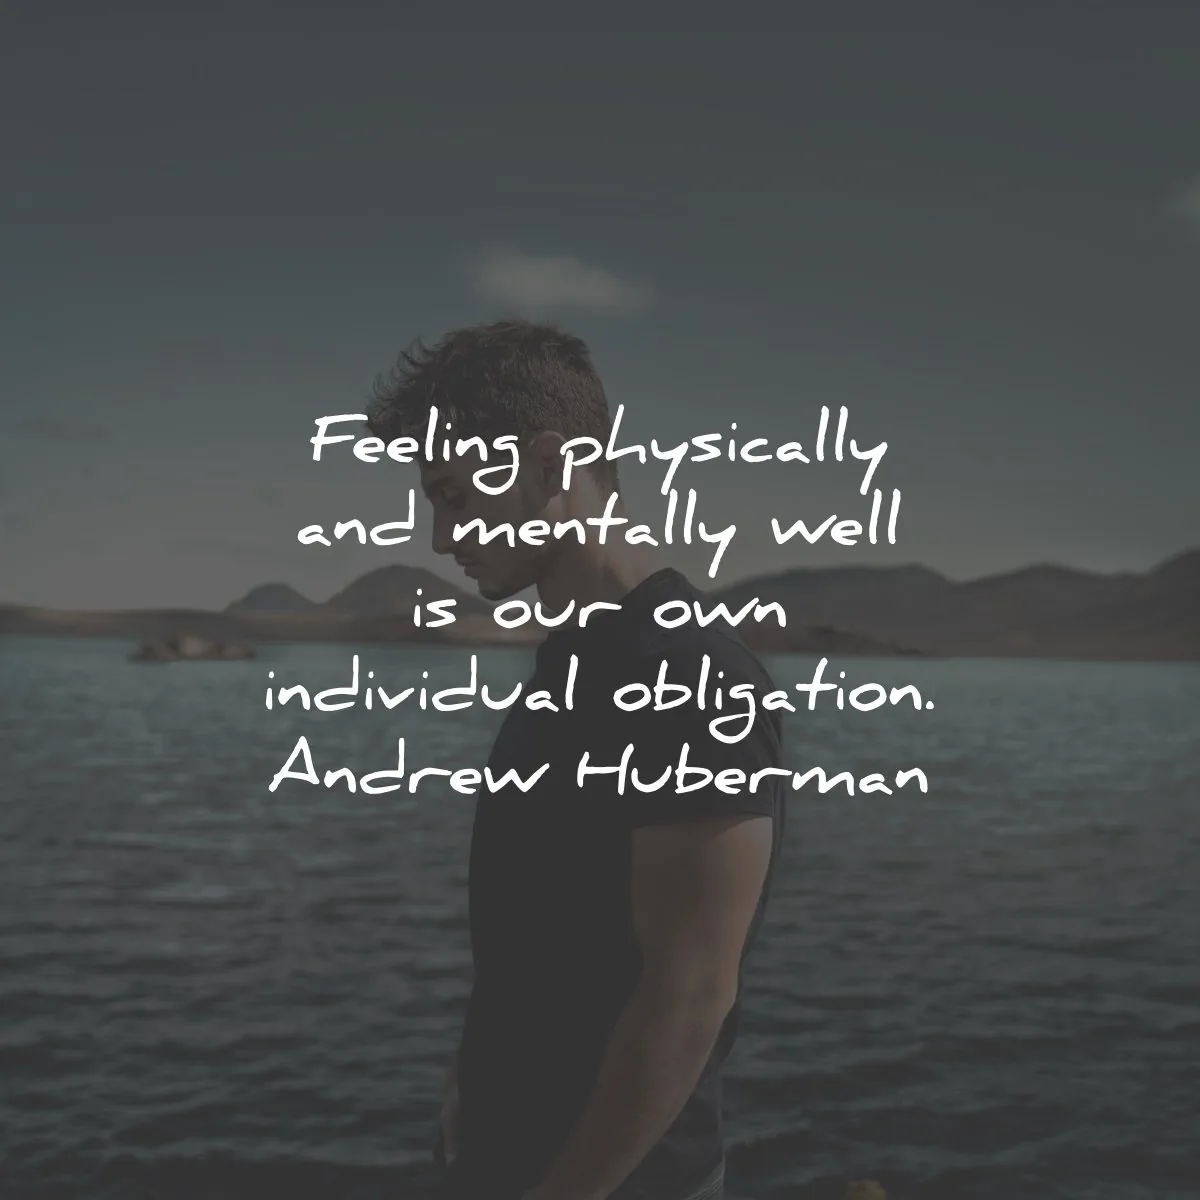 health quotes feeling physically mentally well andrew huberman wisdom